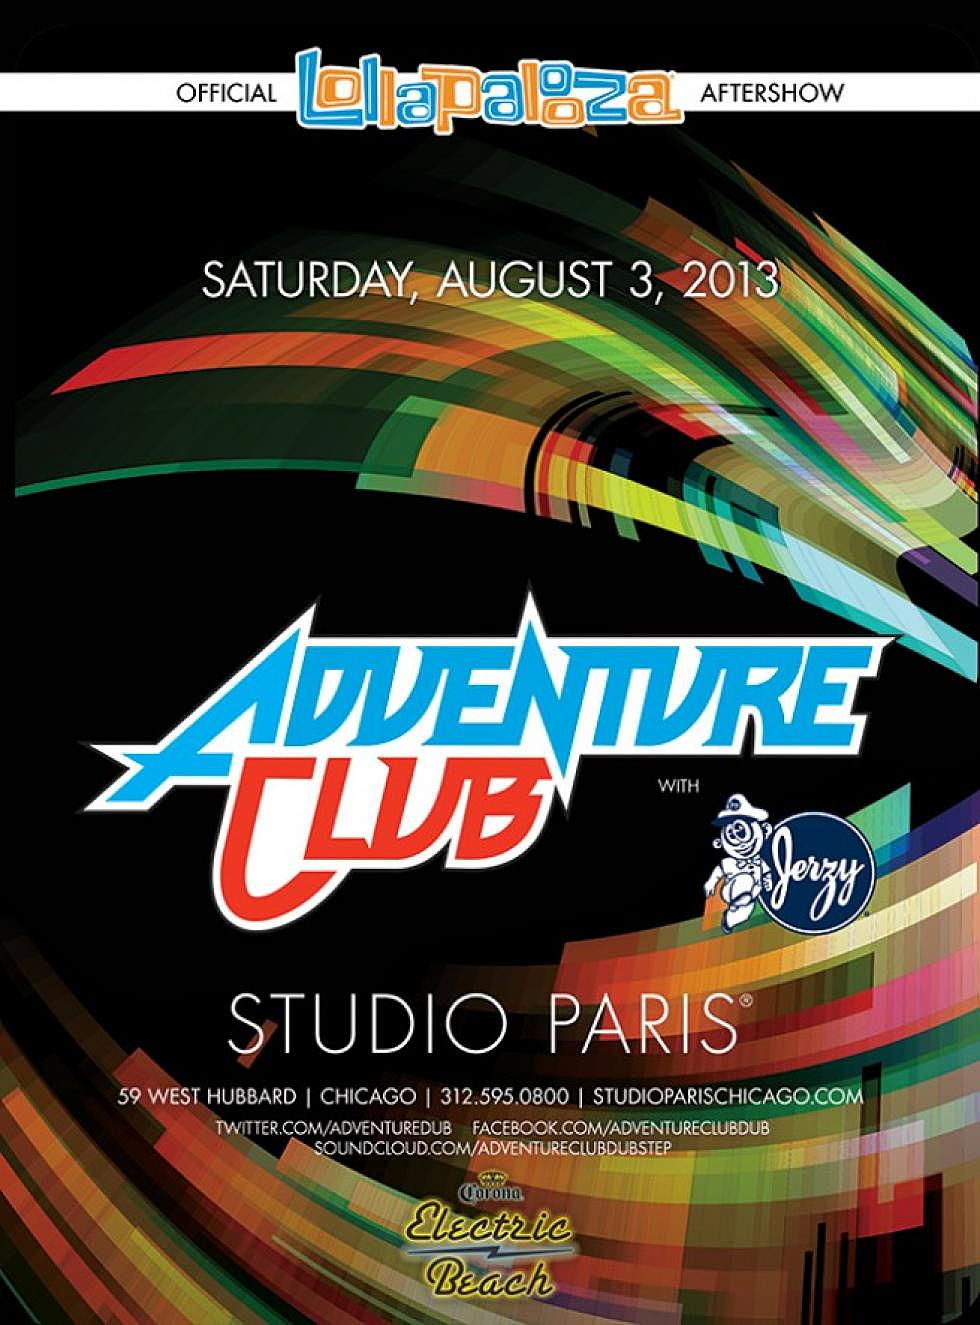 Corona presents Electric Beach with Adventure Club @ Studio Paris, Chicago 8/3 + win a pair of tickets to the show!